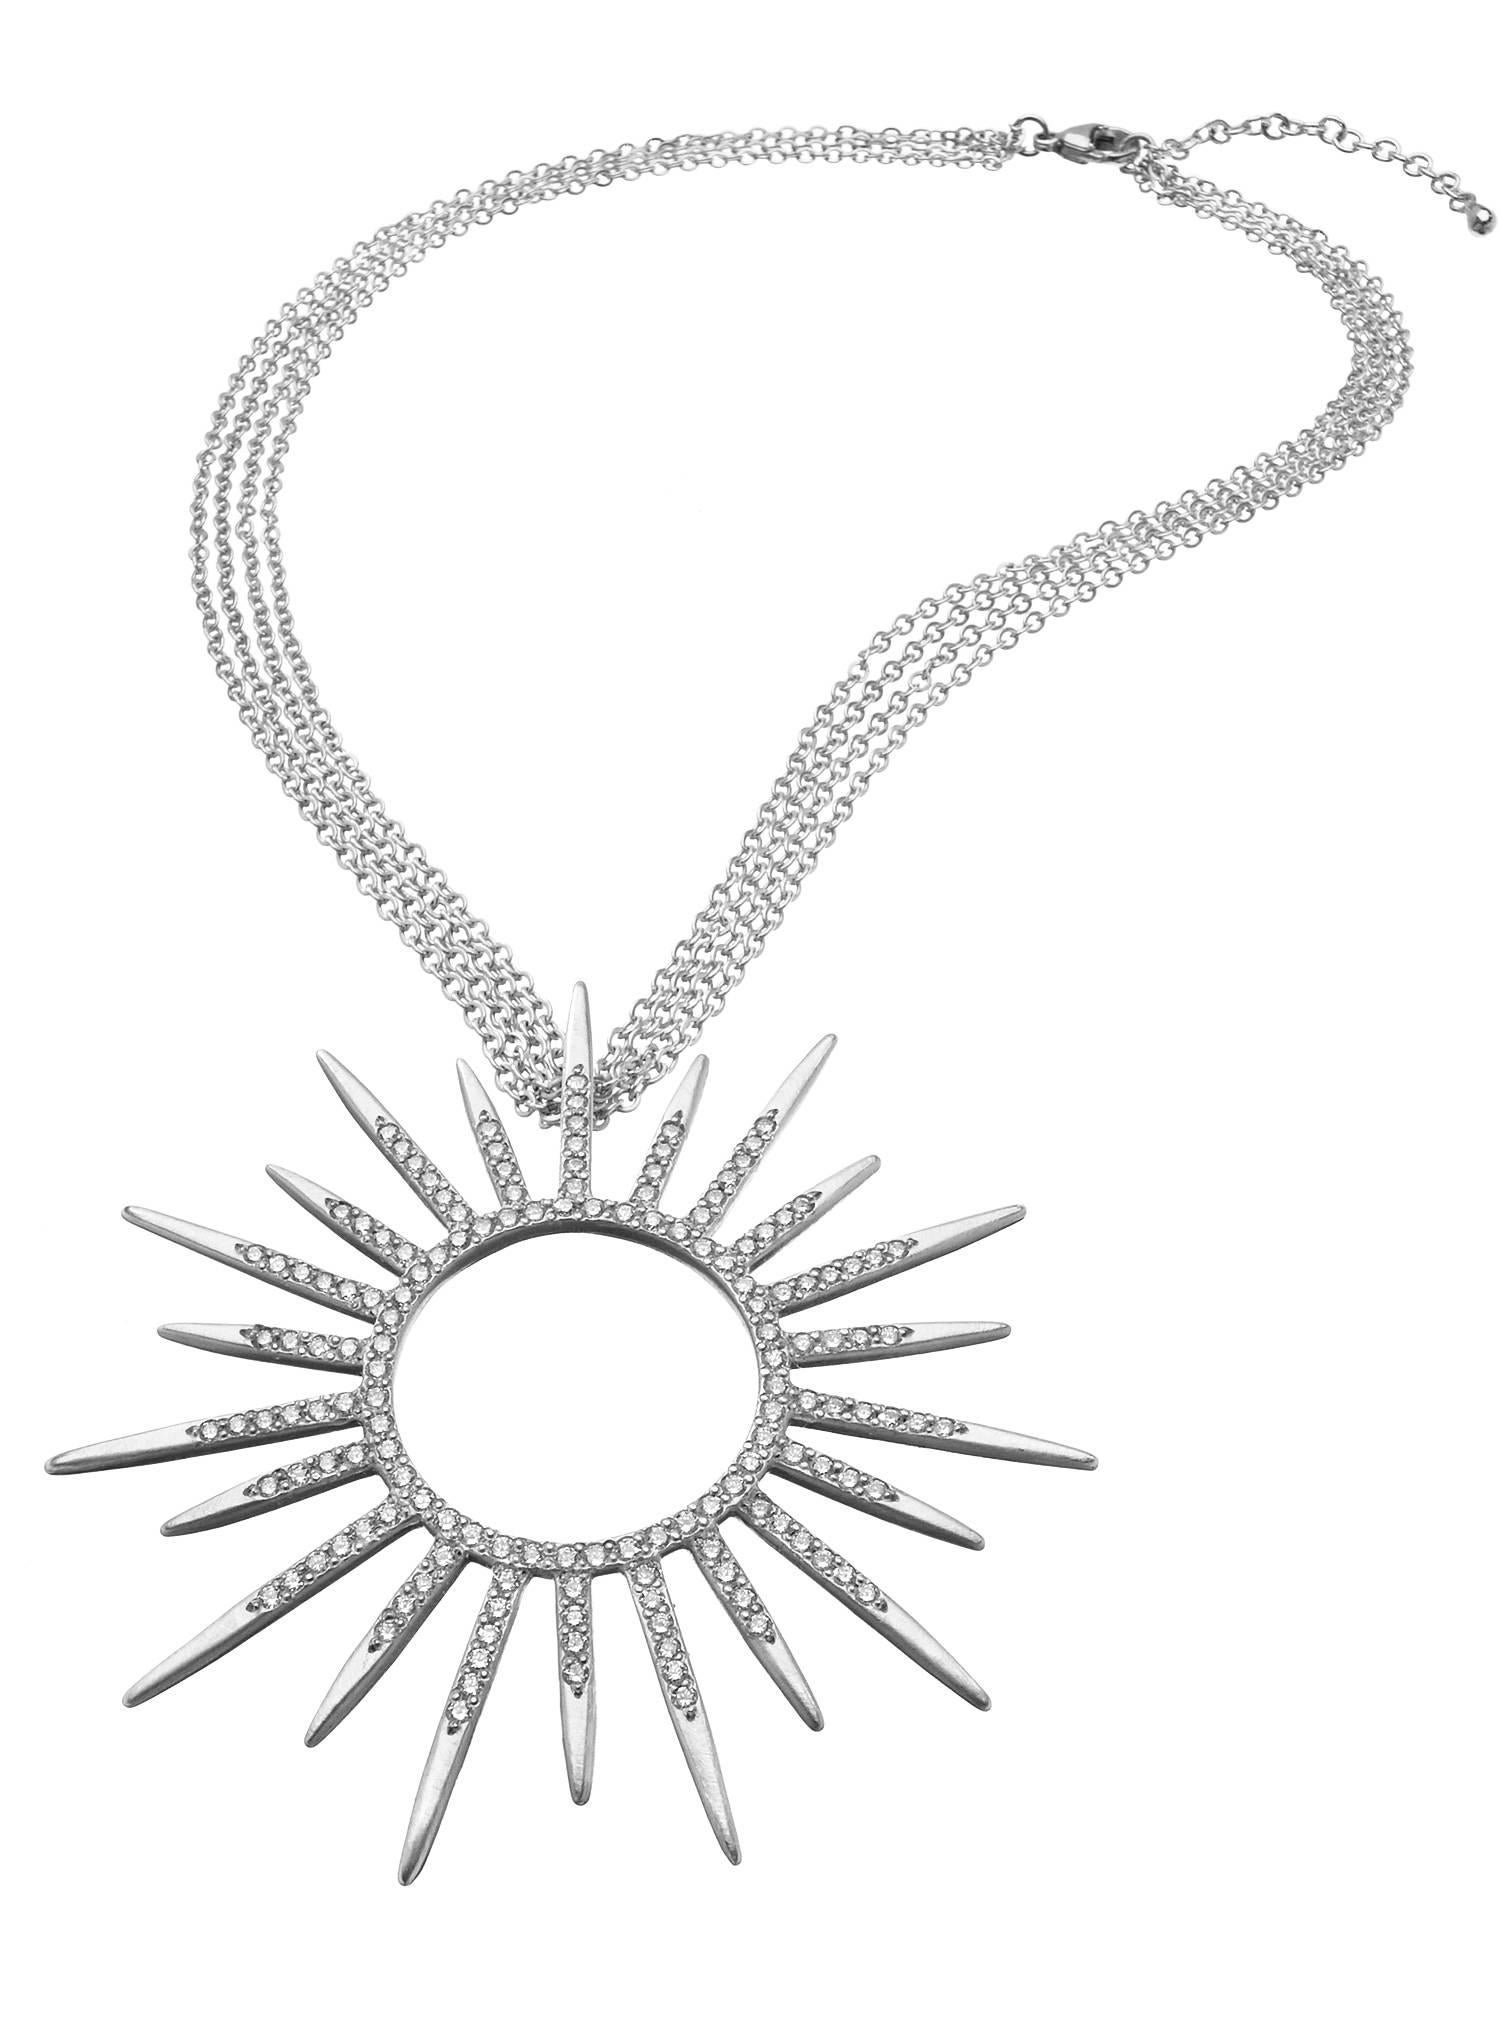 Like many of Wendy's designs, this sunburst pendant was inspired by a powerful woman -- the Tudor dynasty's Queen Elizabeth I.  Elizabeth I carefully crafted a supernatural, deity-like image of herself through portraits, jewelry, dress, and